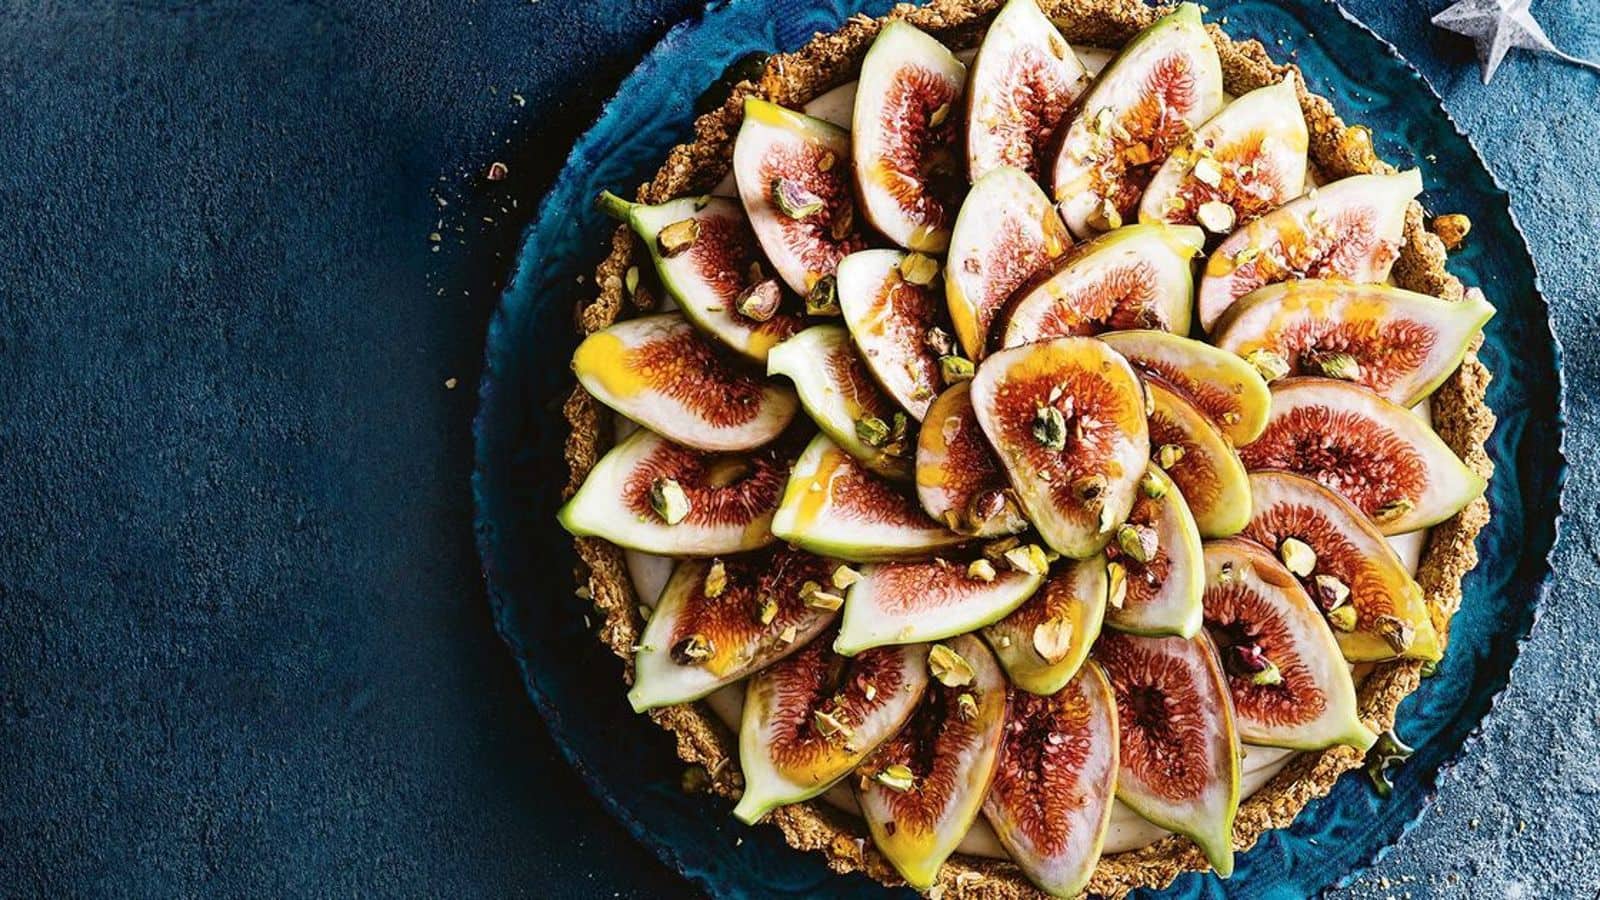 Delicious vegan fig desserts for a healthy heart